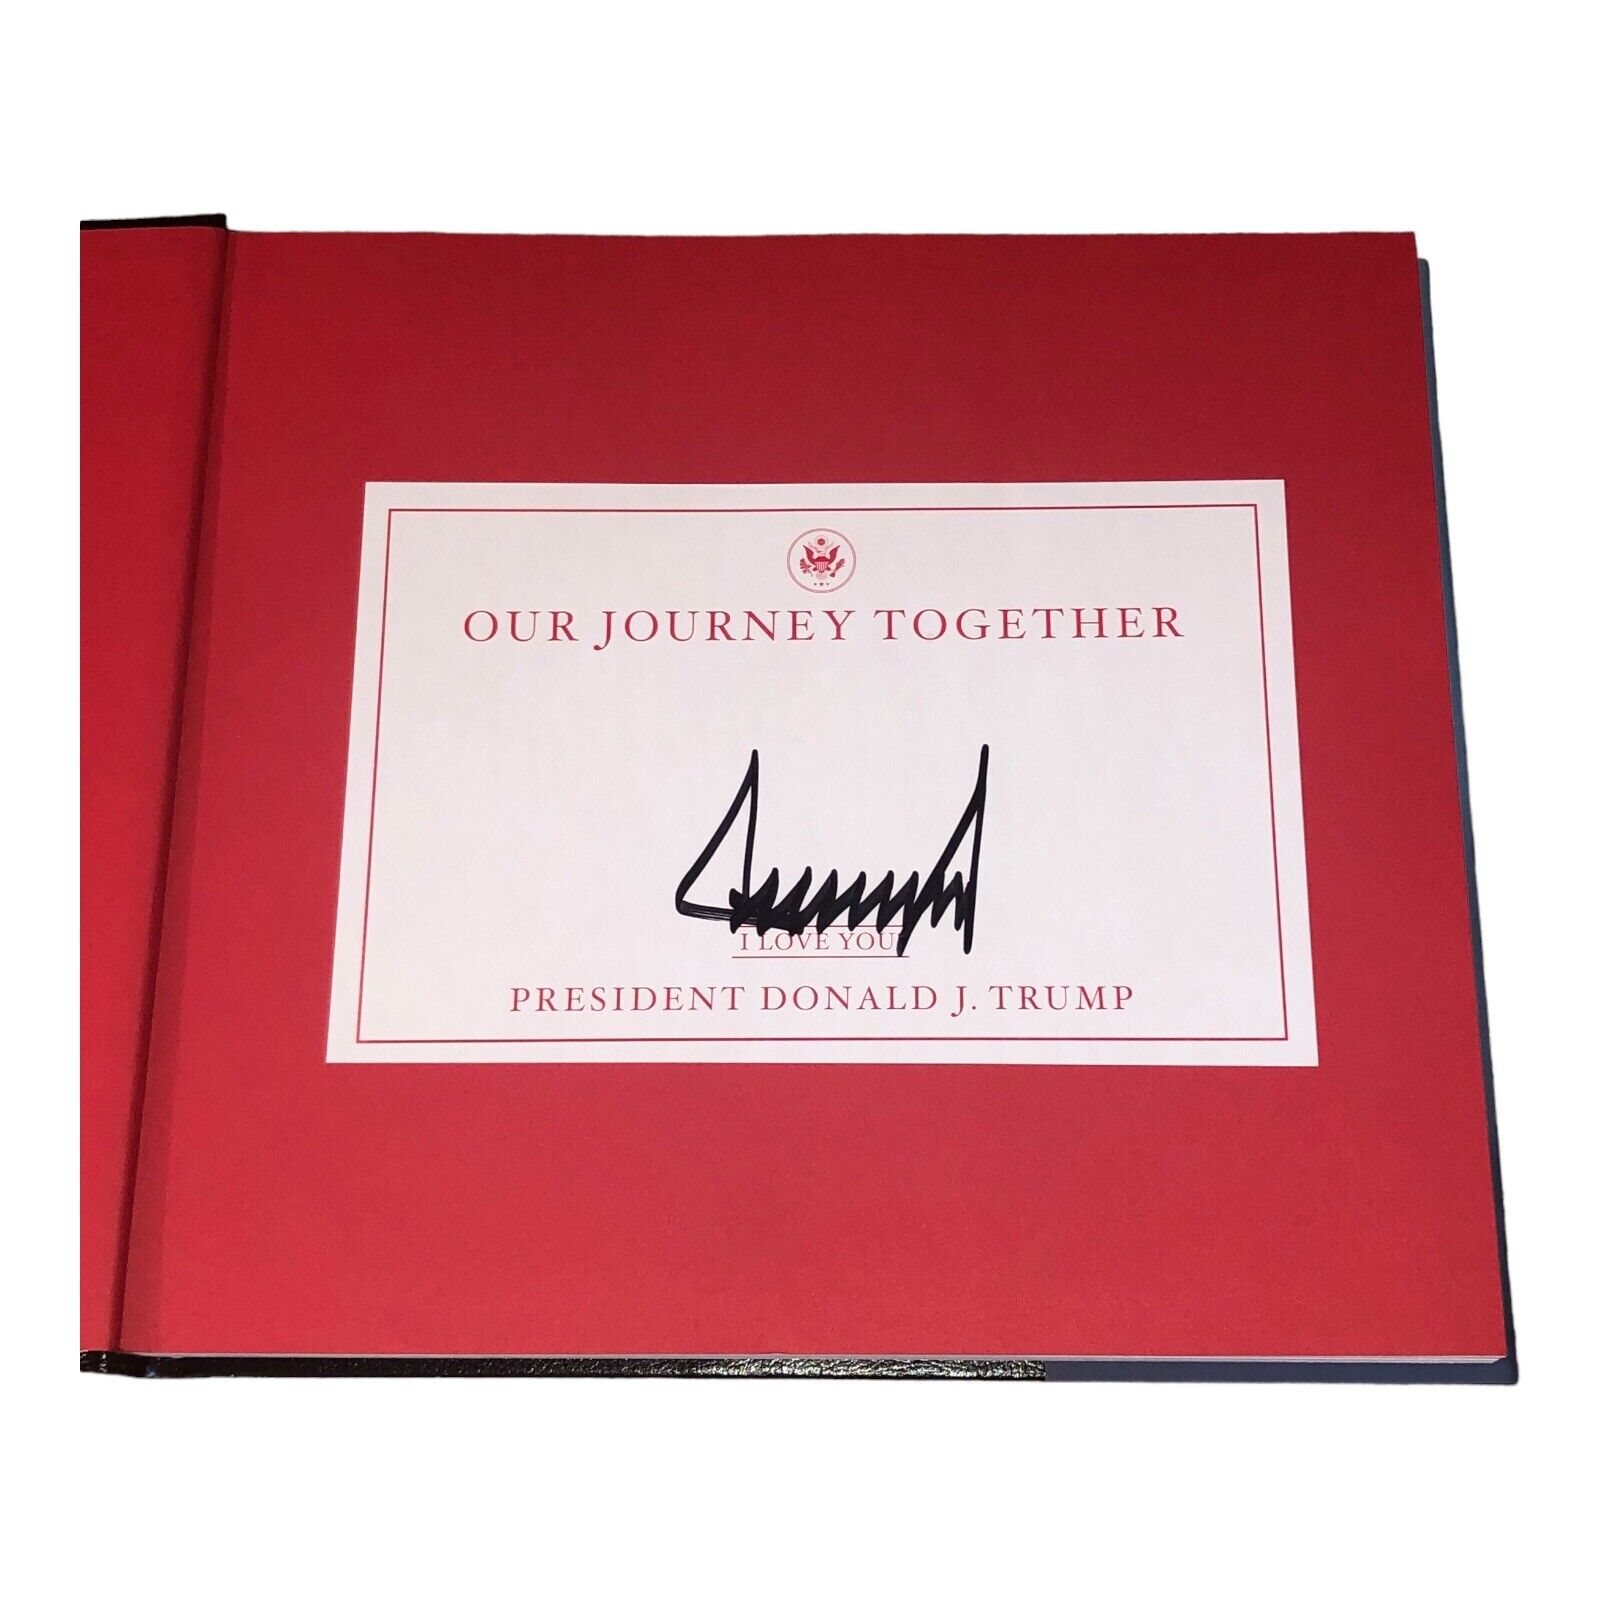 DONALD J TRUMP SIGNED AUTOGRAPH OUR JOURNEY TOGETHER BOOK HARDCOVER PRESIDENT